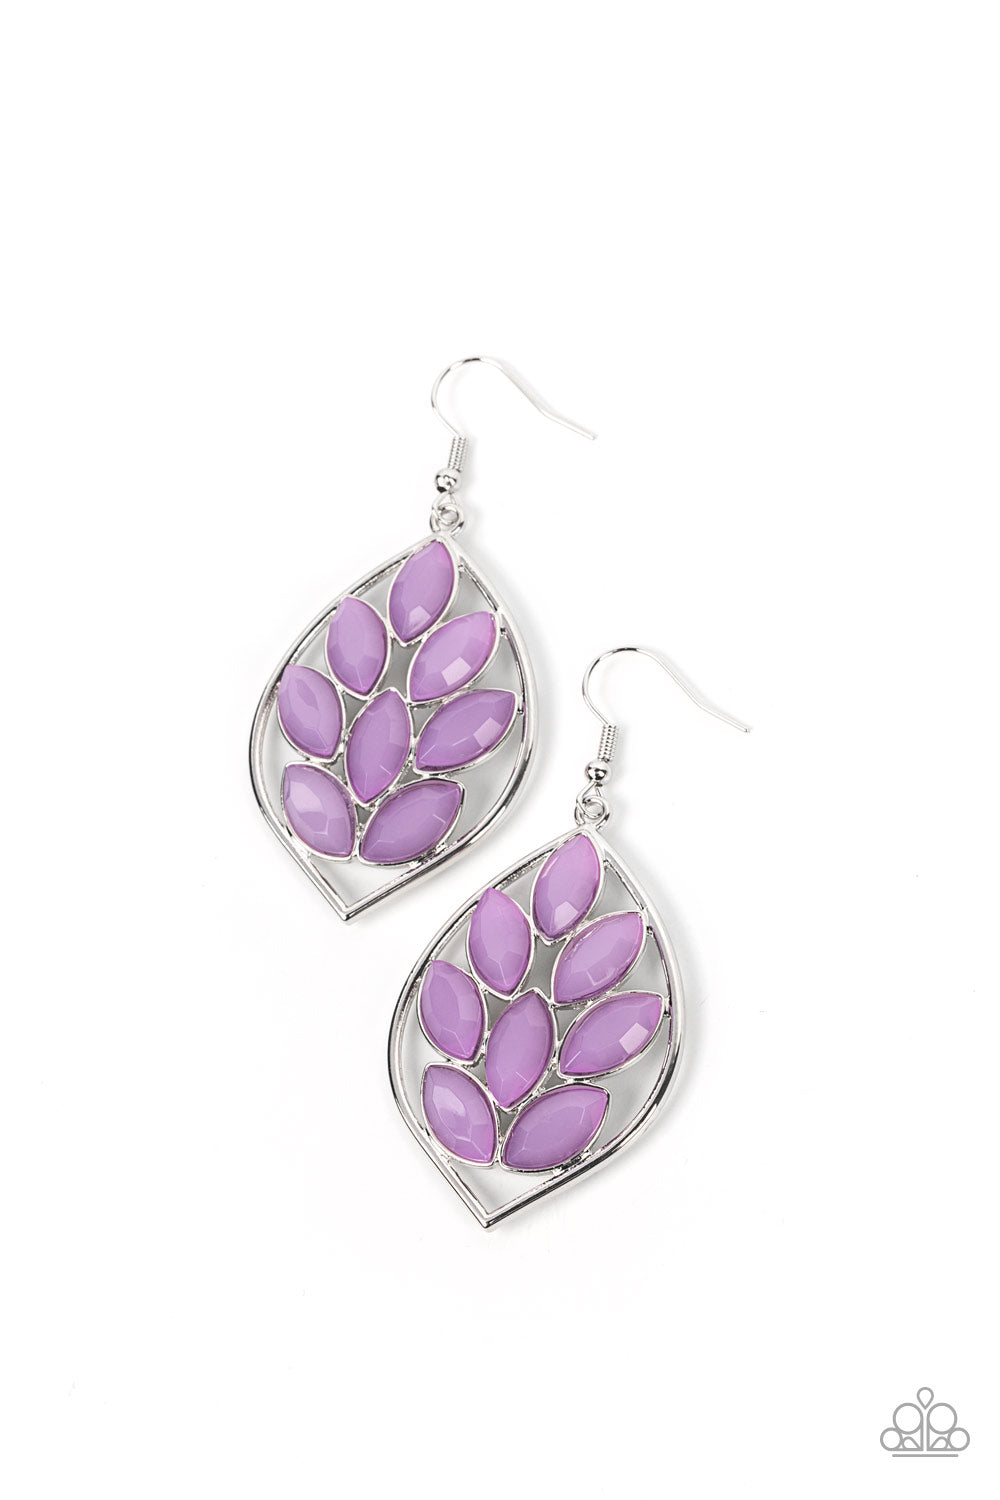 five-dollar-jewelry-glacial-glades-purple-earrings-paparazzi-accessories